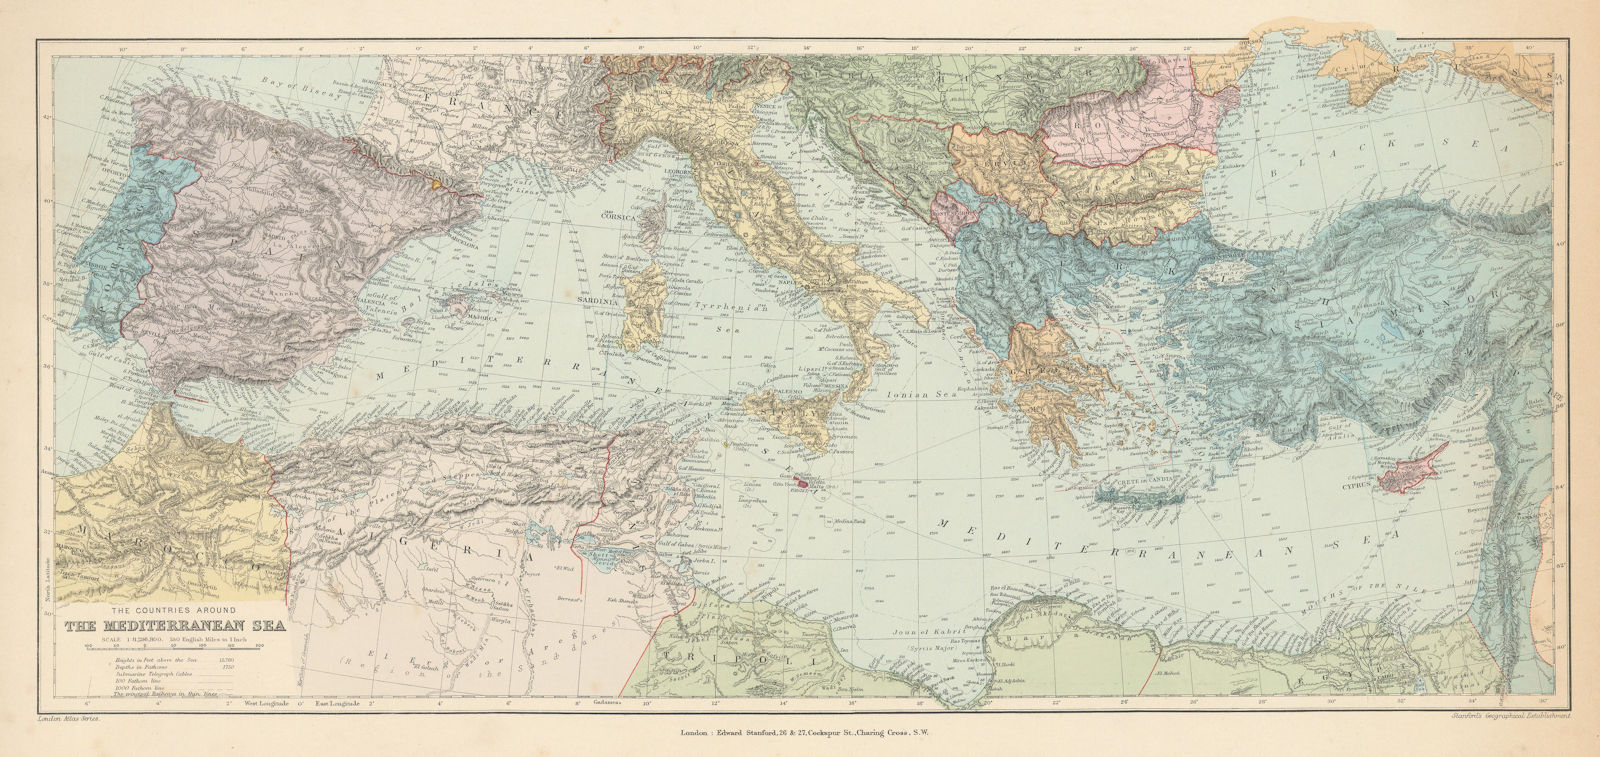 Associate Product Countries round the Mediterranean. Soundings Telegraph cables. STANFORD 1894 map